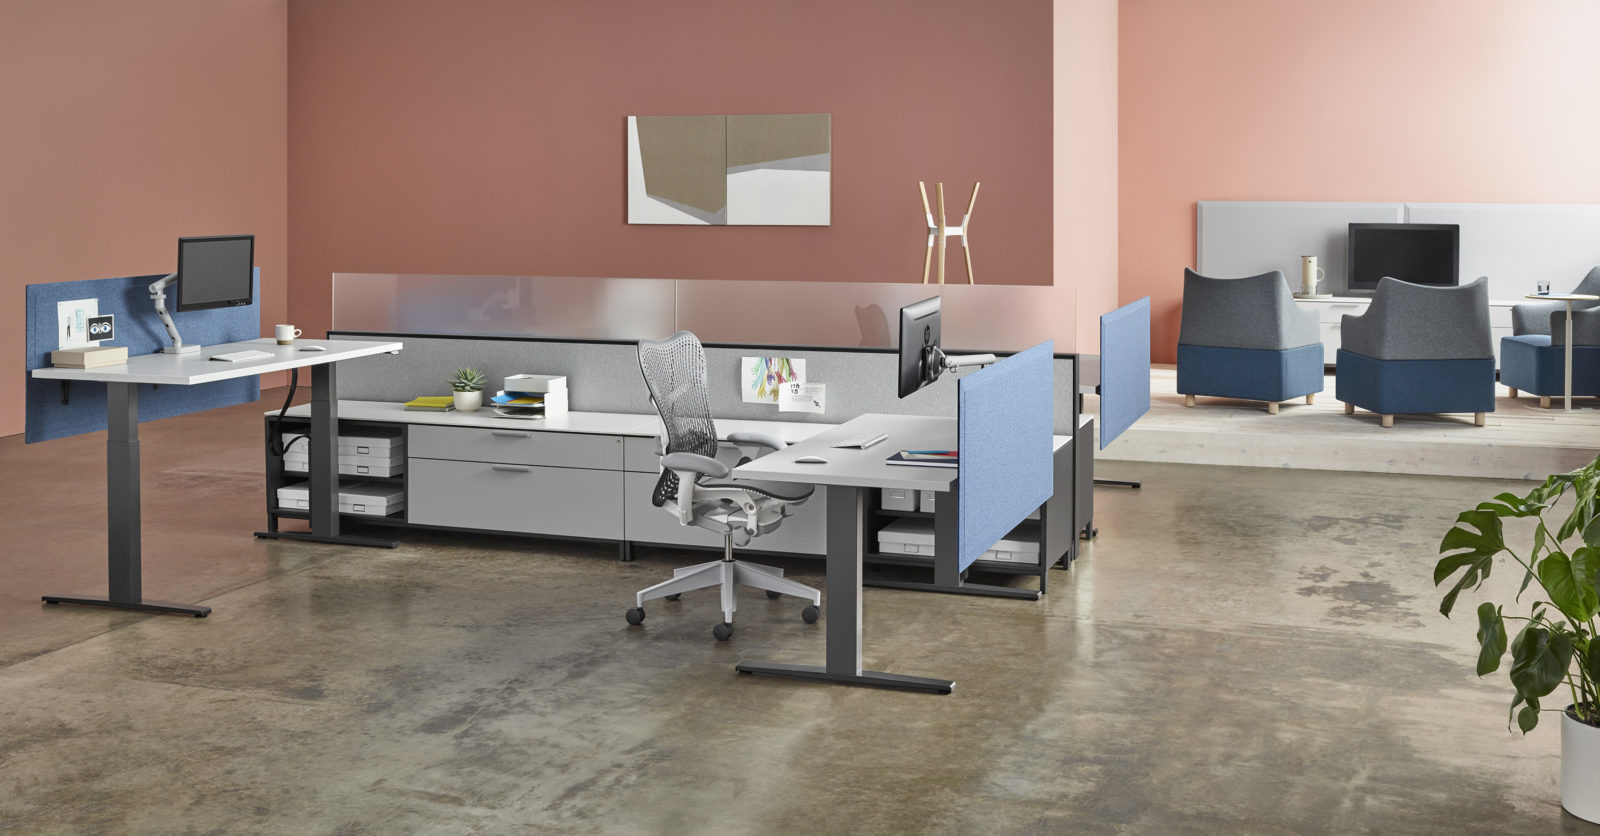 Herman Miller Motia height-adjustable tables in a cluster of workstations. Herman Miller Canvas with storage is down the spline of the stations.